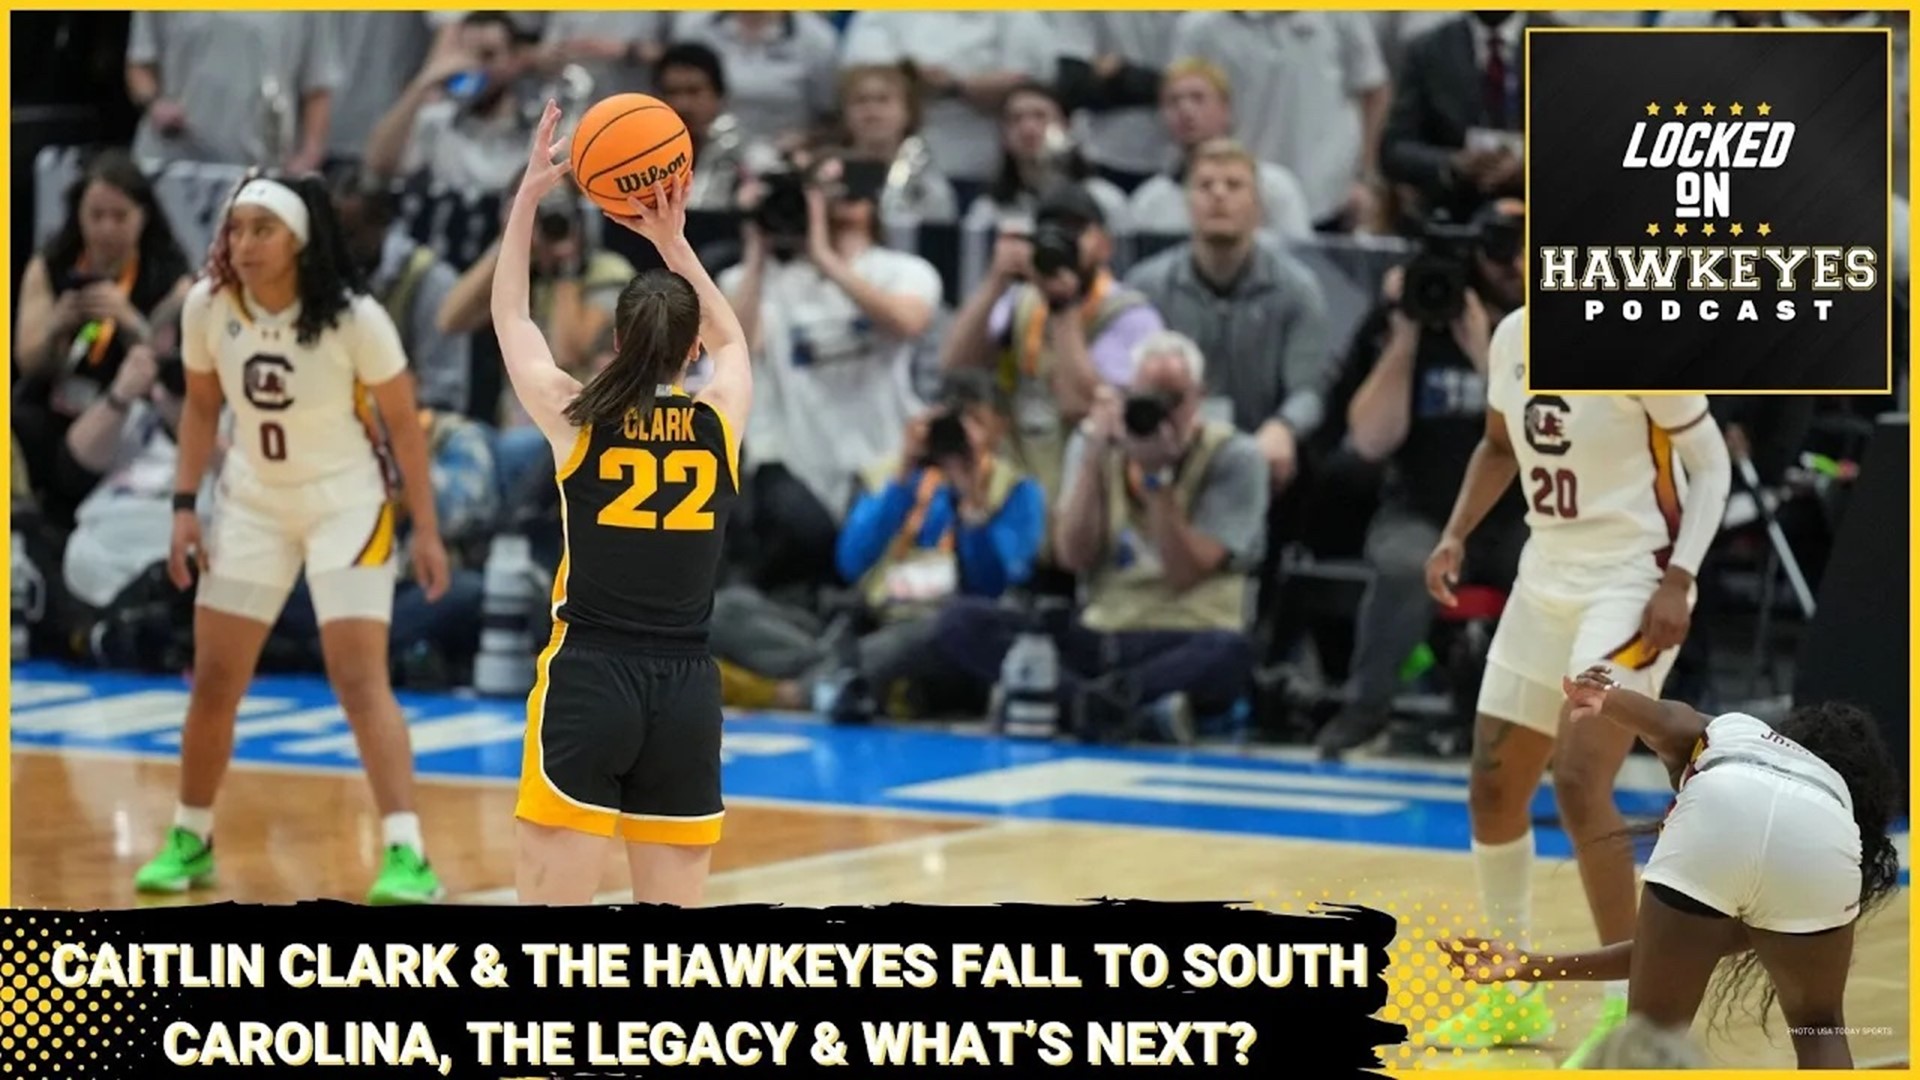 Trent Condon returns for a recap edition of the Locked on Hawkeyes Podcast. First a look back at the game, then a look at Caitlin Clark's lasting legacy.